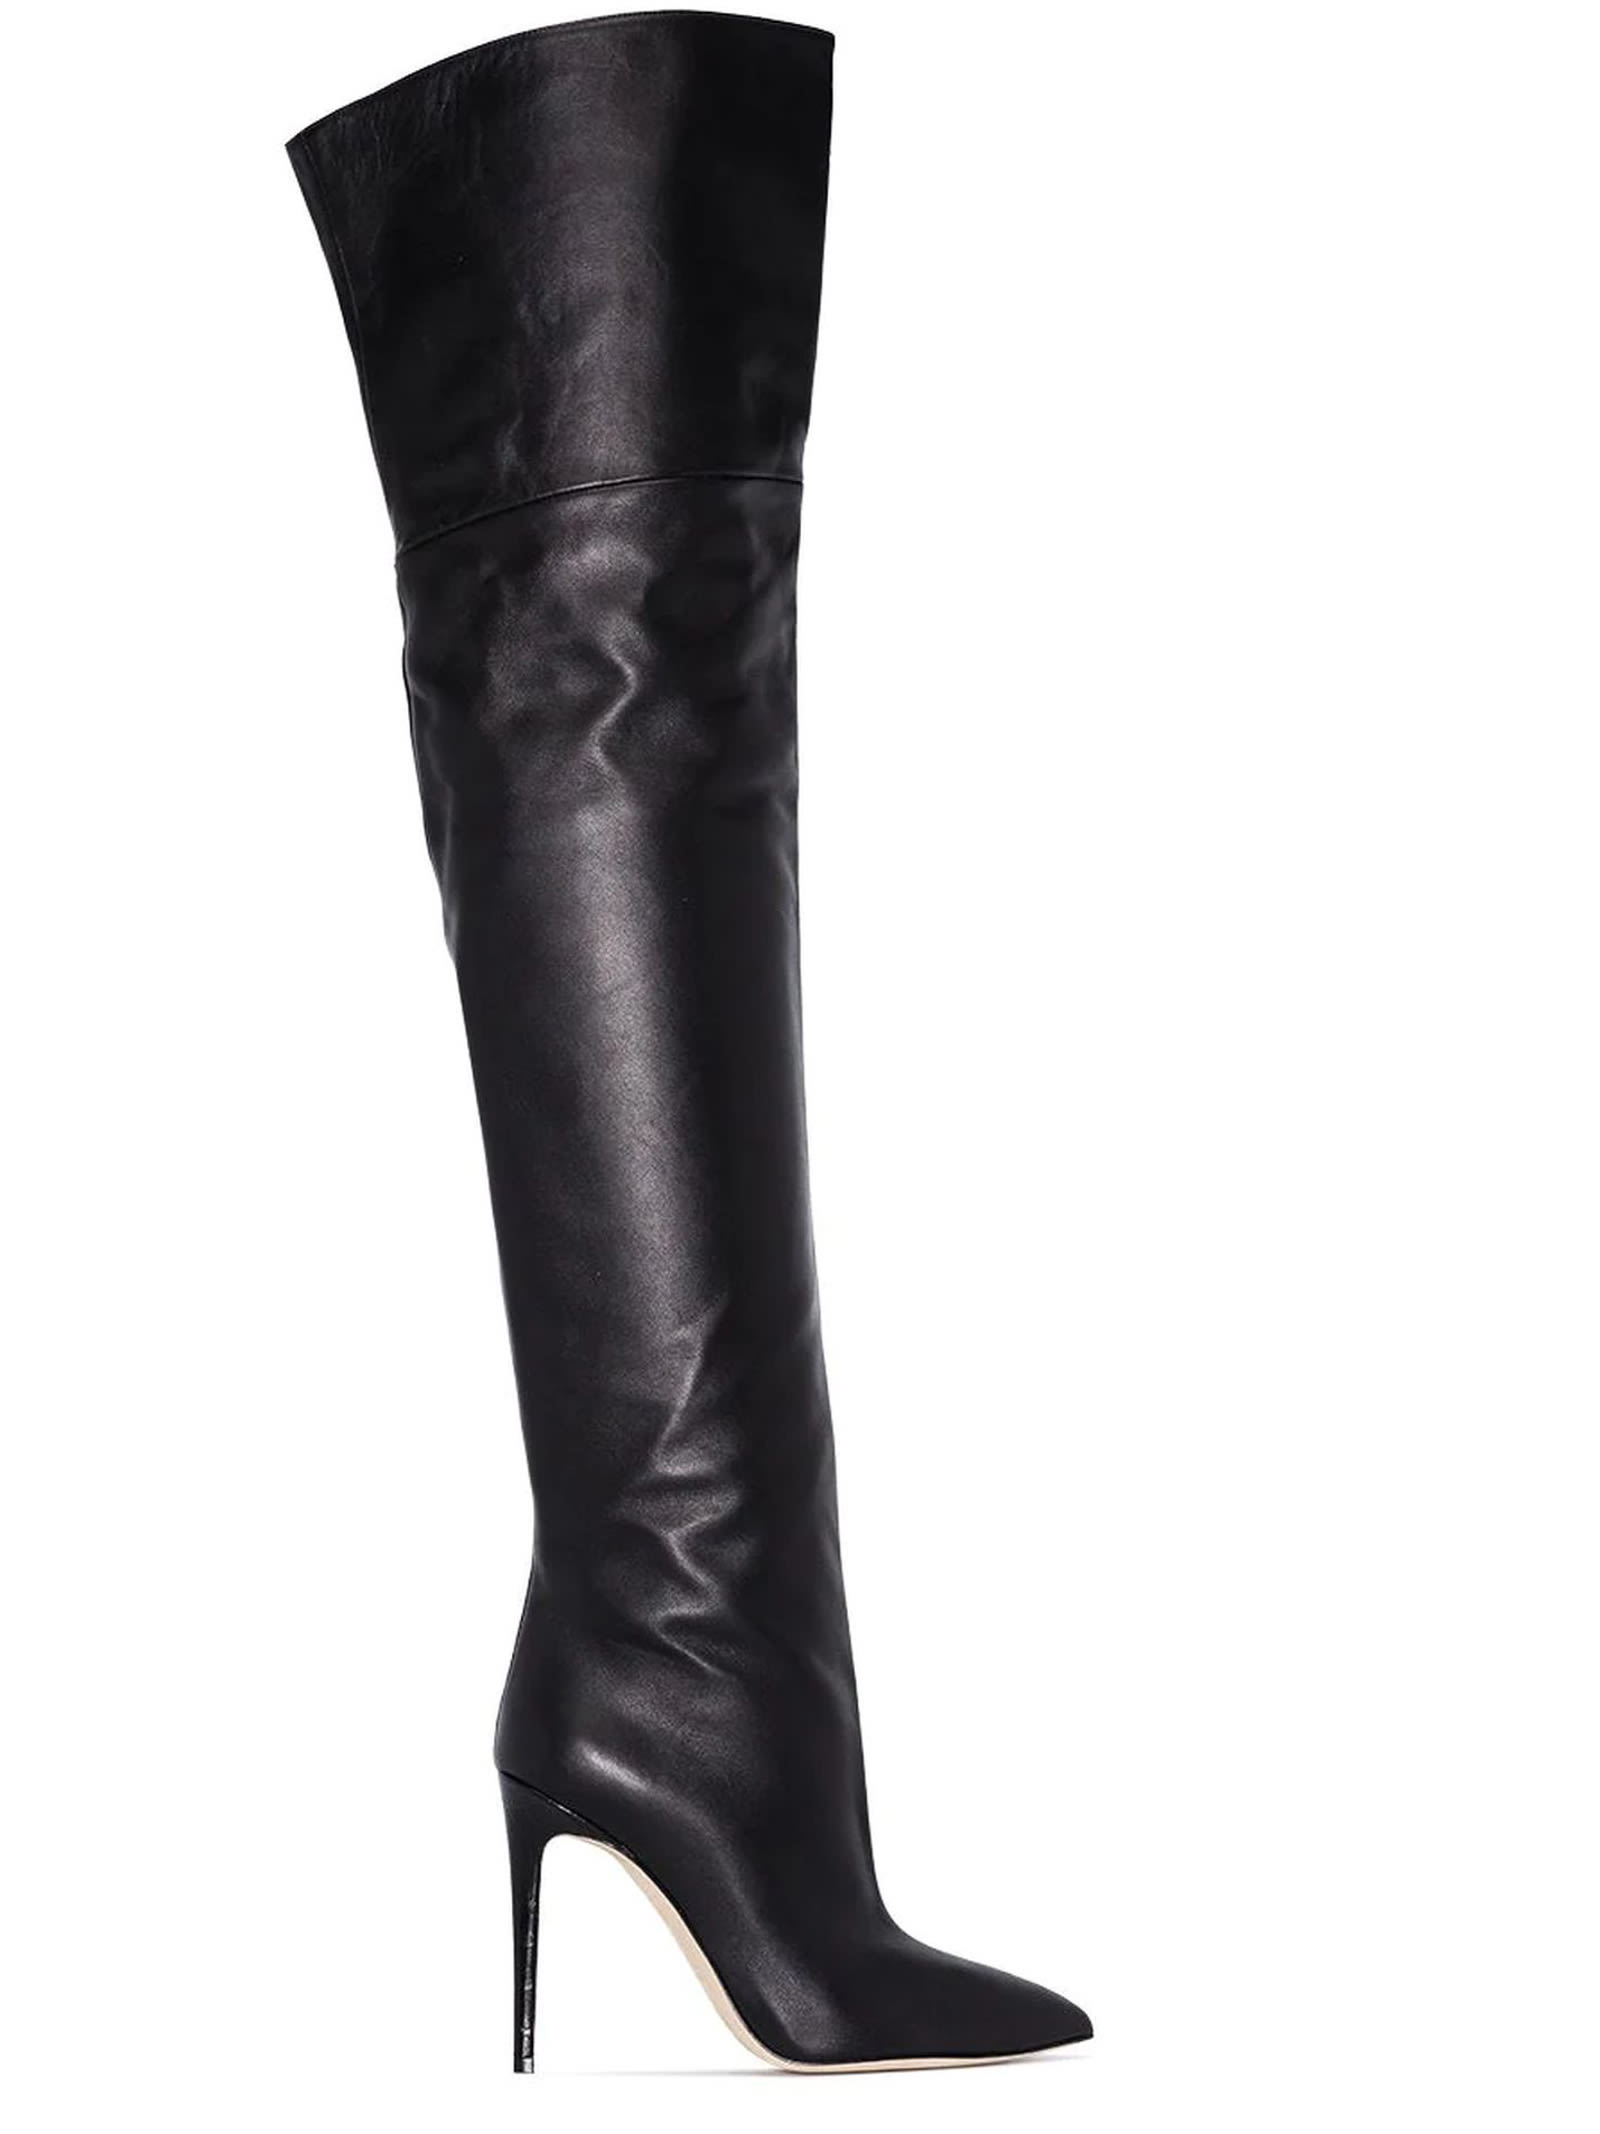 Paris Texas Black Leather Over-the-knee Boots